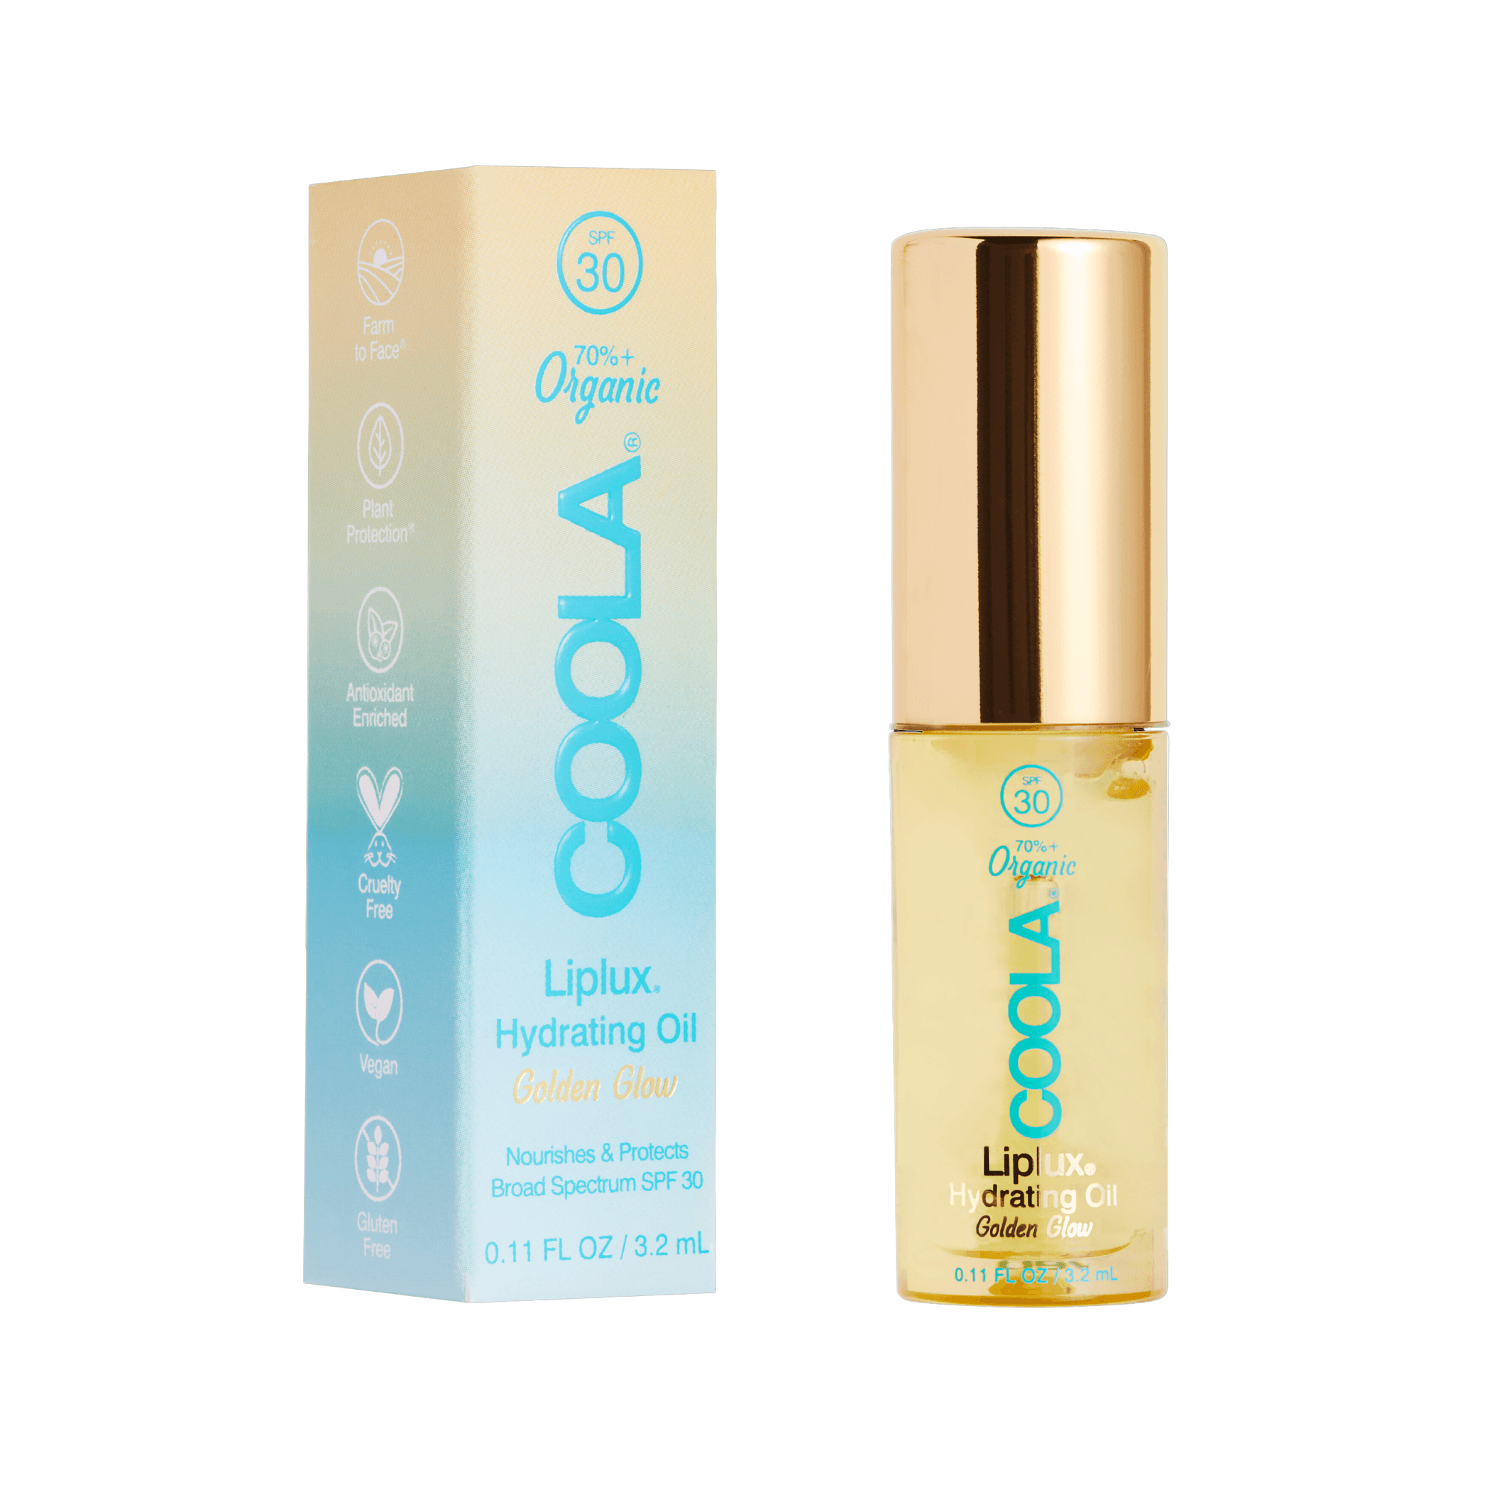 Product image from COOLA - Classic Liplux Organic Hydrating Lip Oil Sunscreen SPF30